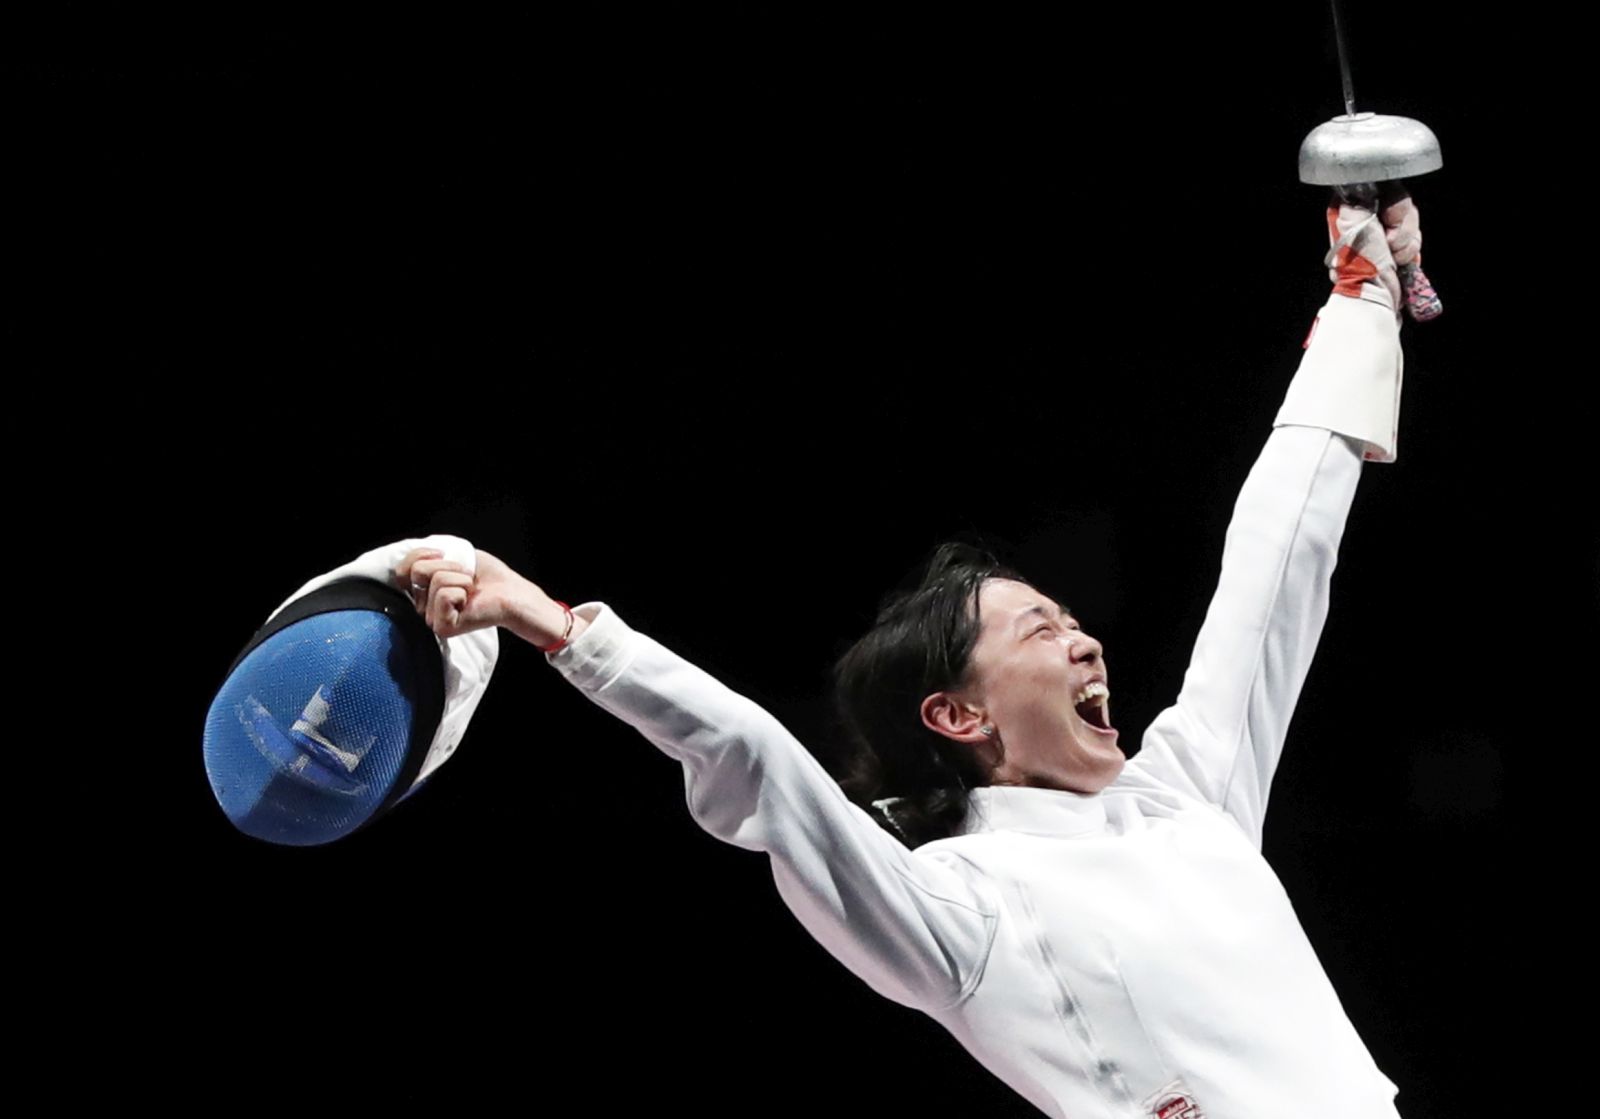 epa09361916 Yiwen Sun of China celebrates winning the gold medal during the women's Epee individual Gold Medal Bout during the Fencing events of the Tokyo 2020 Olympic Games at the Makuhari Messe convention centre in Chiba, Japan, 24 July 2021.  EPA/KIYOSHI OTA